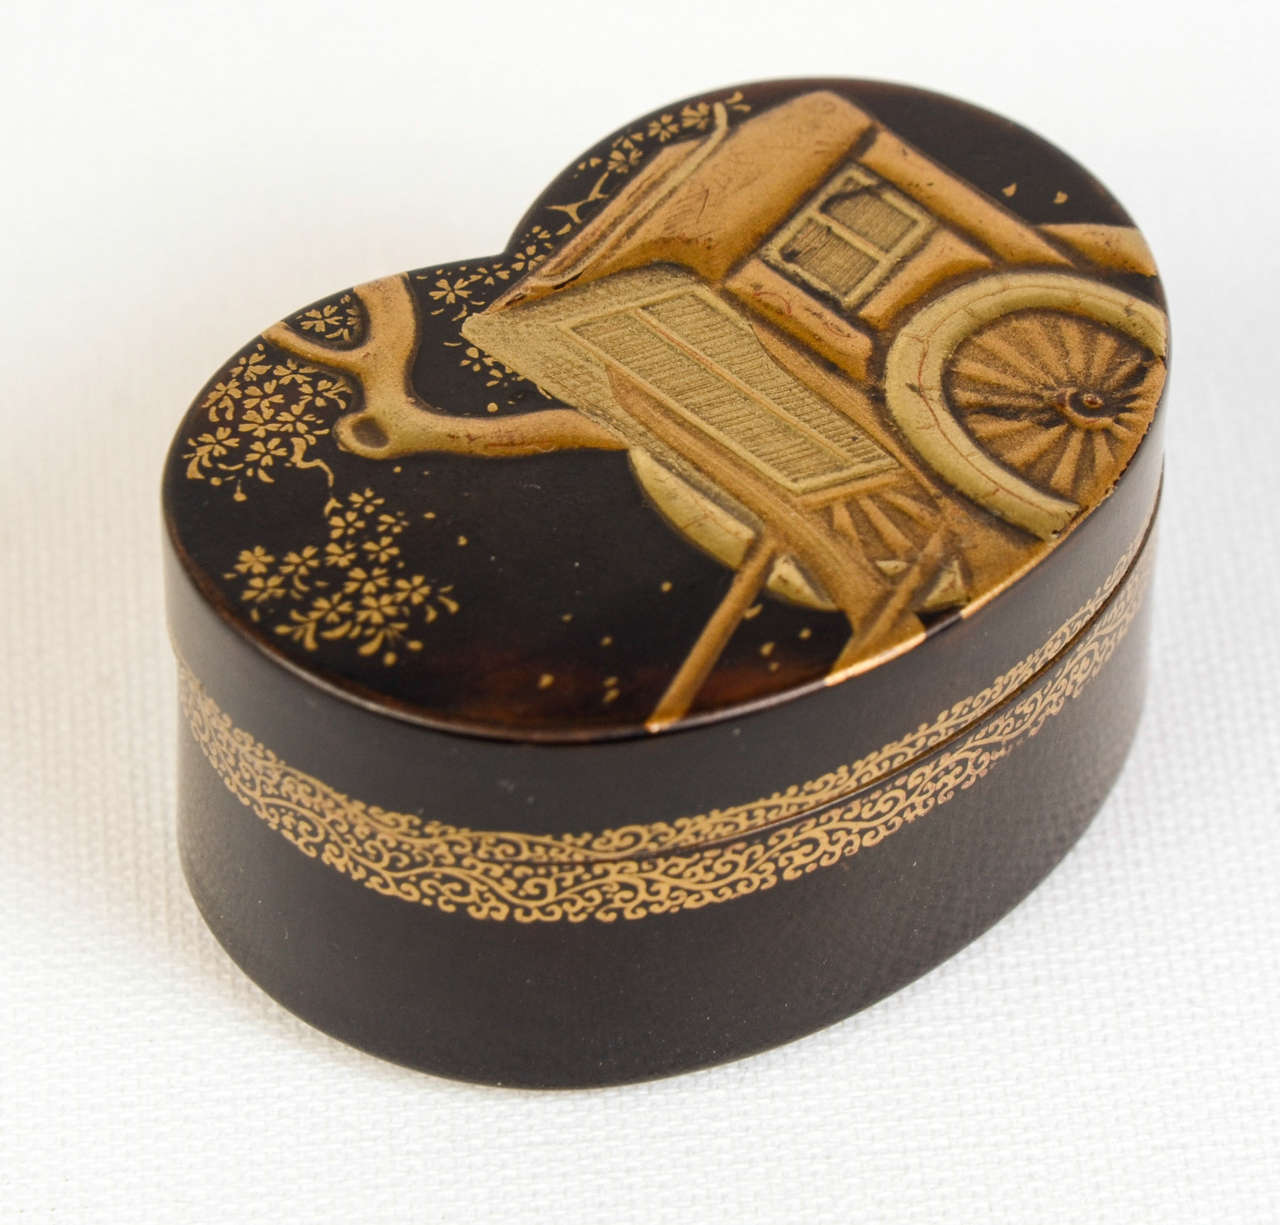 Hira maki-e decorated black lacquer kobako with a gilded lacquer decor of a carriage in front of a tree. Nashi-ji lacquer inside. Two remaining labels with numbers from previous collections sticked under the kobako and the top.